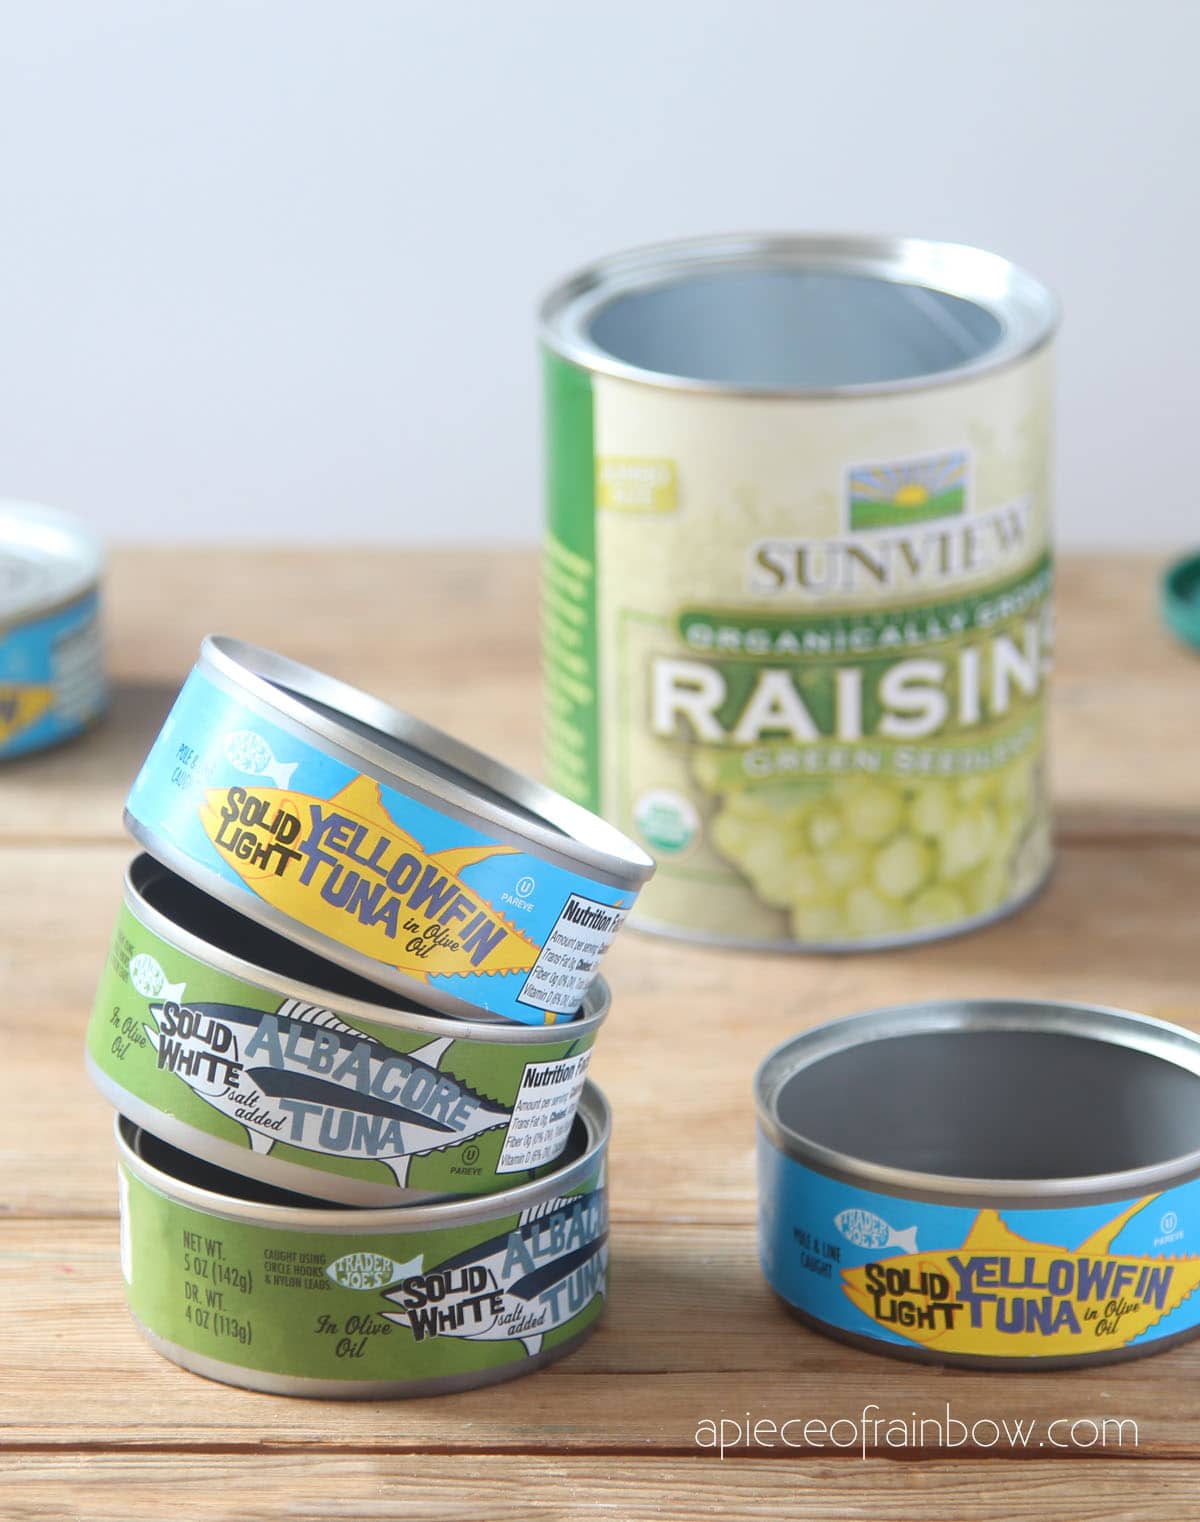 Tuna cans and raisin cans to make Christmas ornaments 